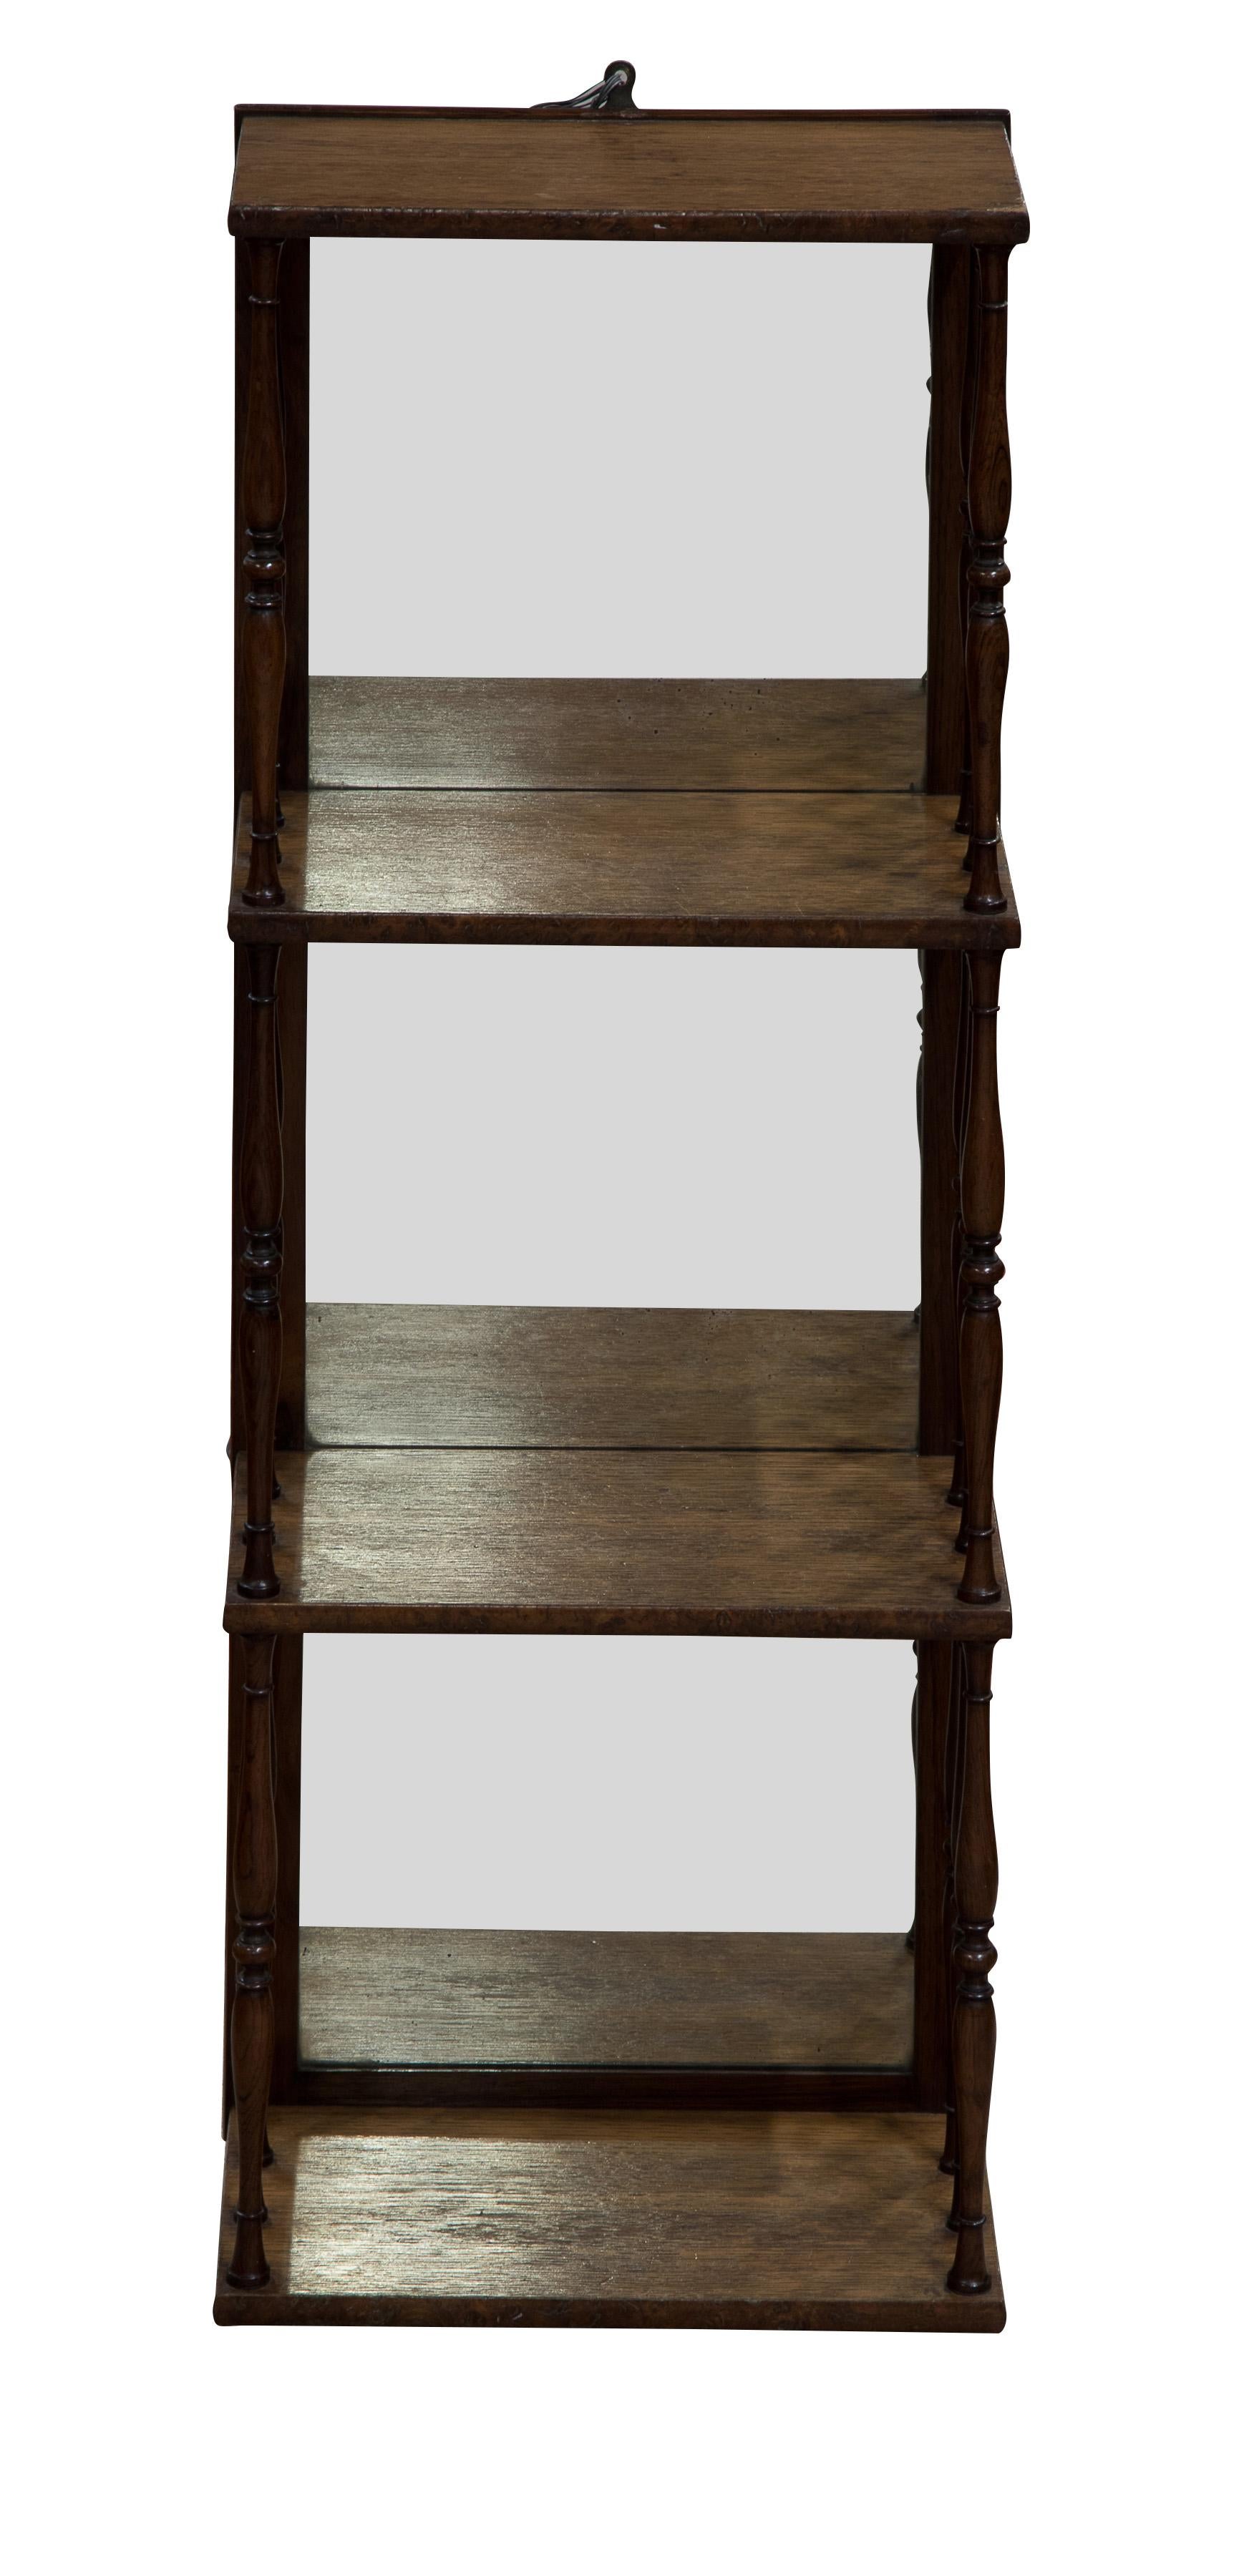 20th Century Regency Rosewood Wall Mirror with Oak Shelves Banded with Walnut Burr circa 1820 For Sale